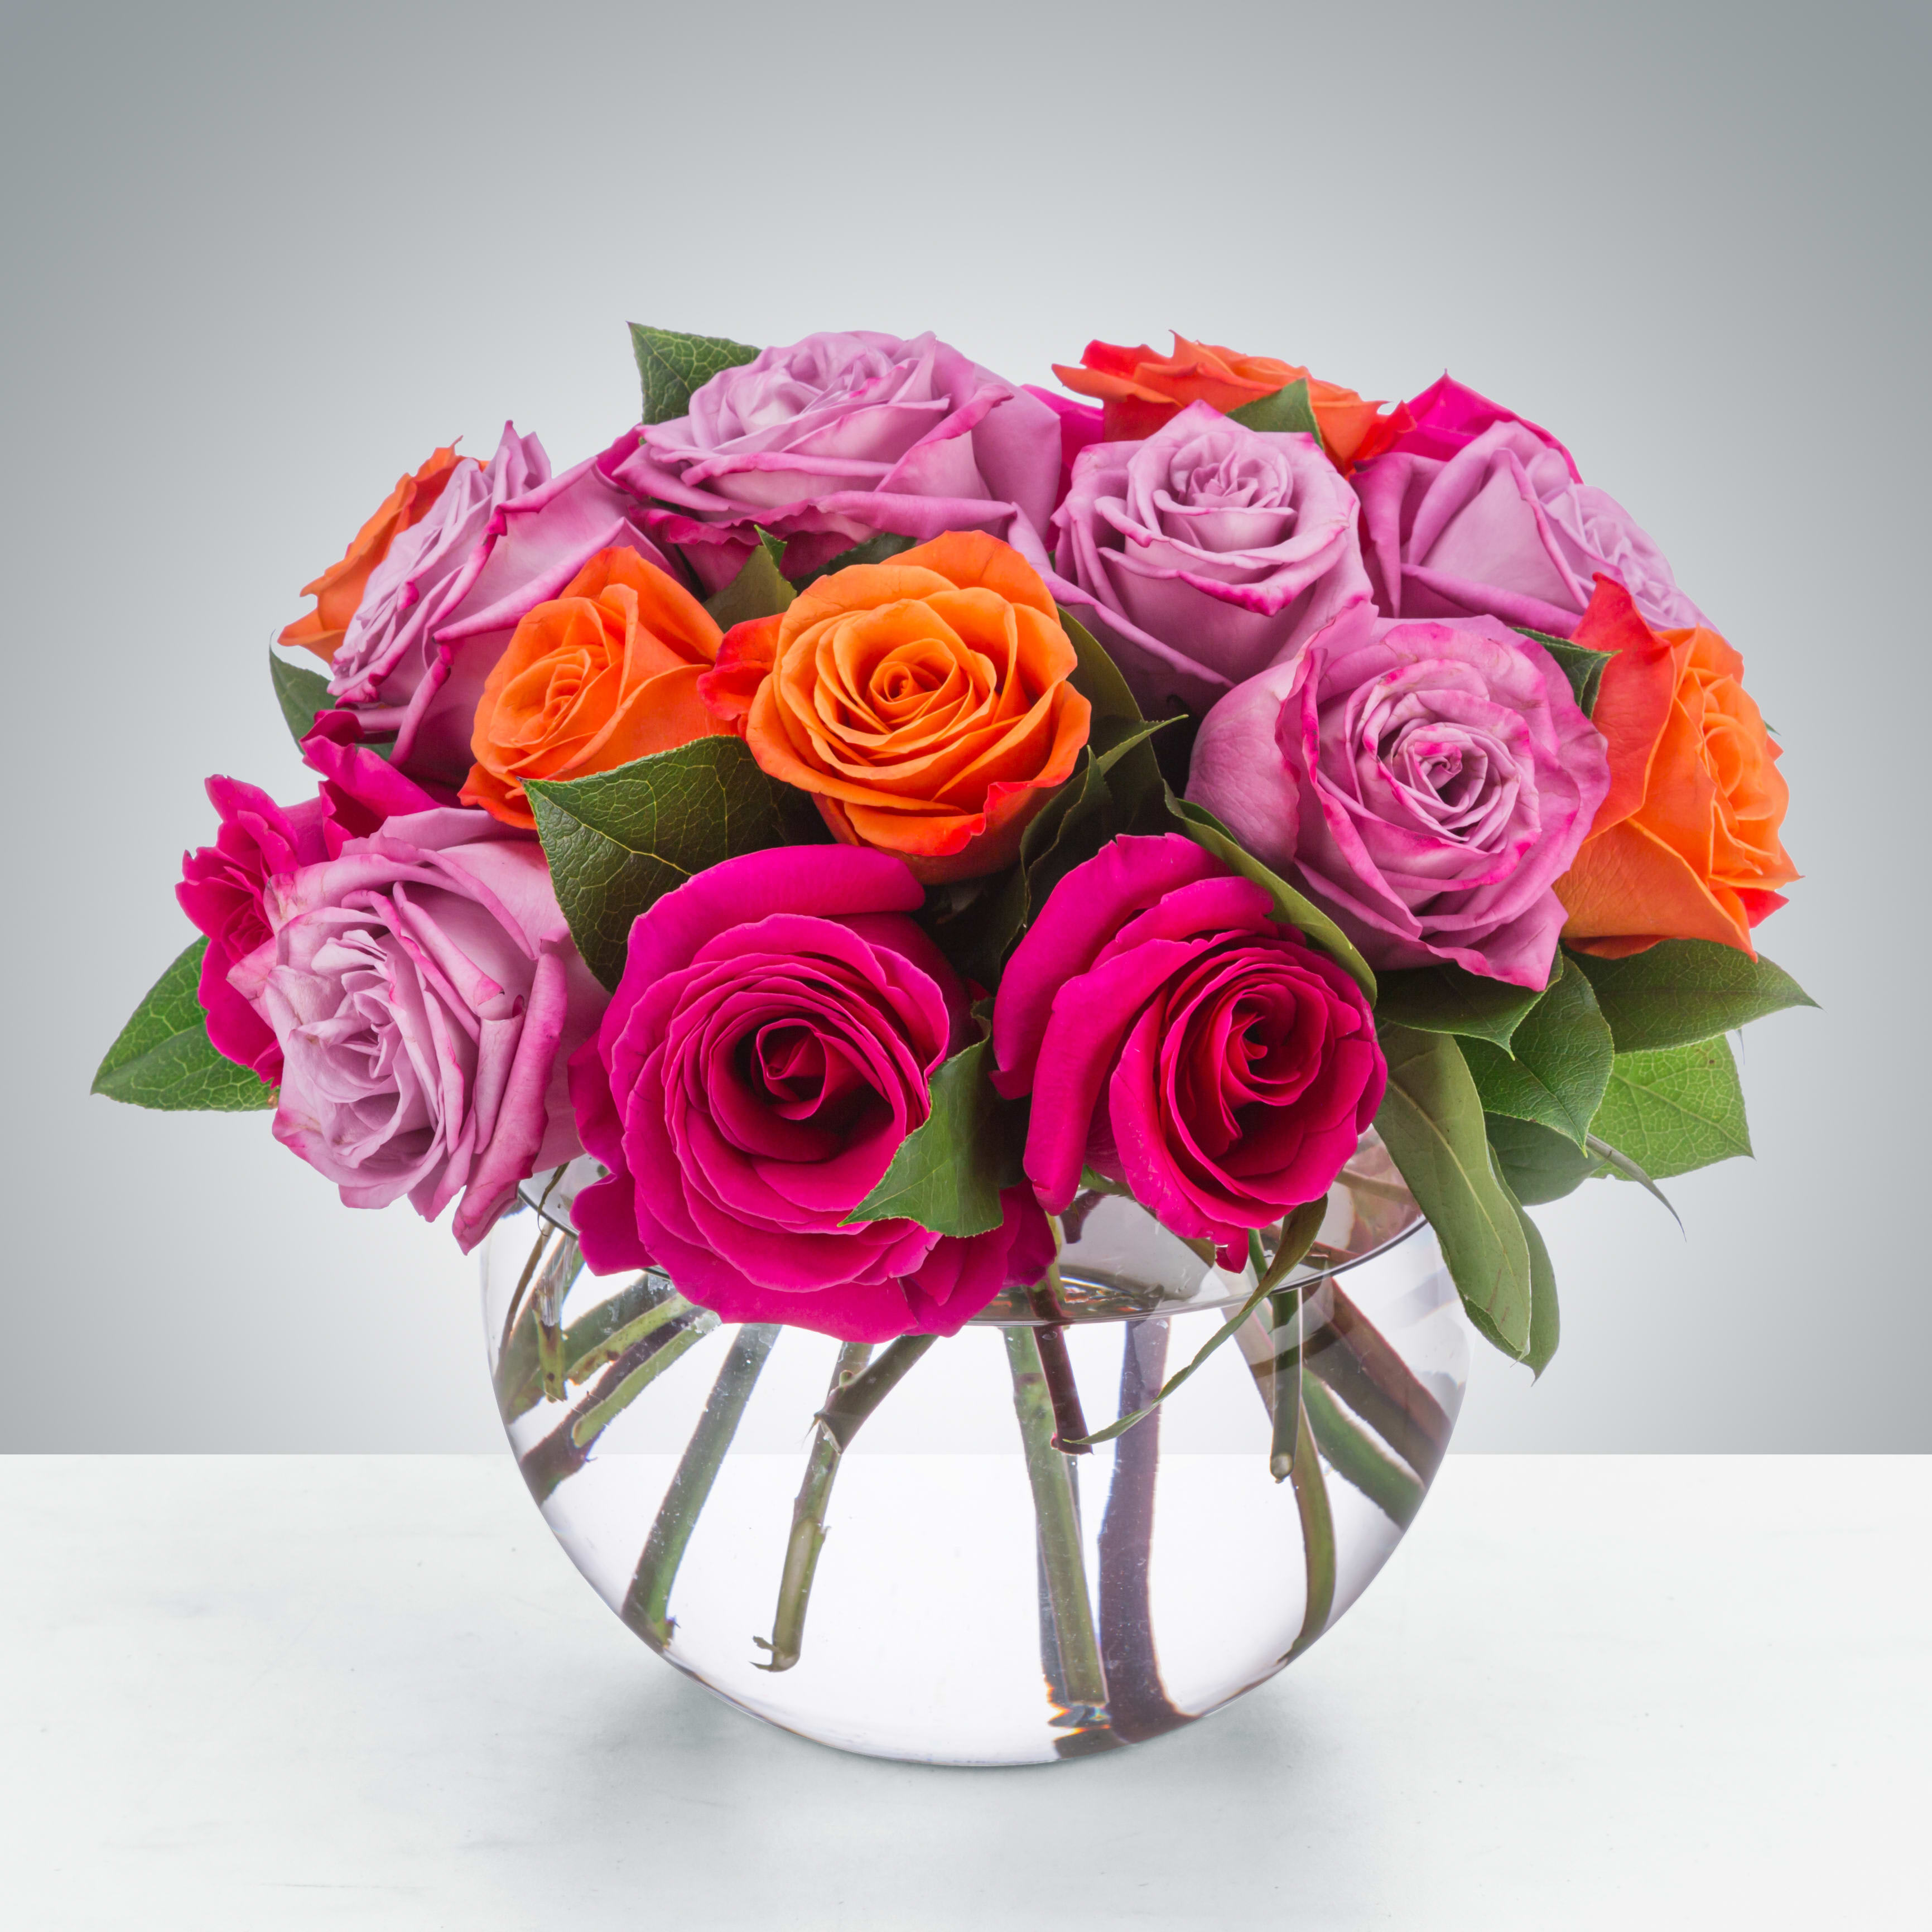 Daybreak by BloomNation™ - A lovely bowl of colorful roses brightens and lifts any room (and relationship!) A great gift for sending on Valentine's Day to your significant other, your friend, or even your mom!  Approximate Dimensions: 11''D x 11''H